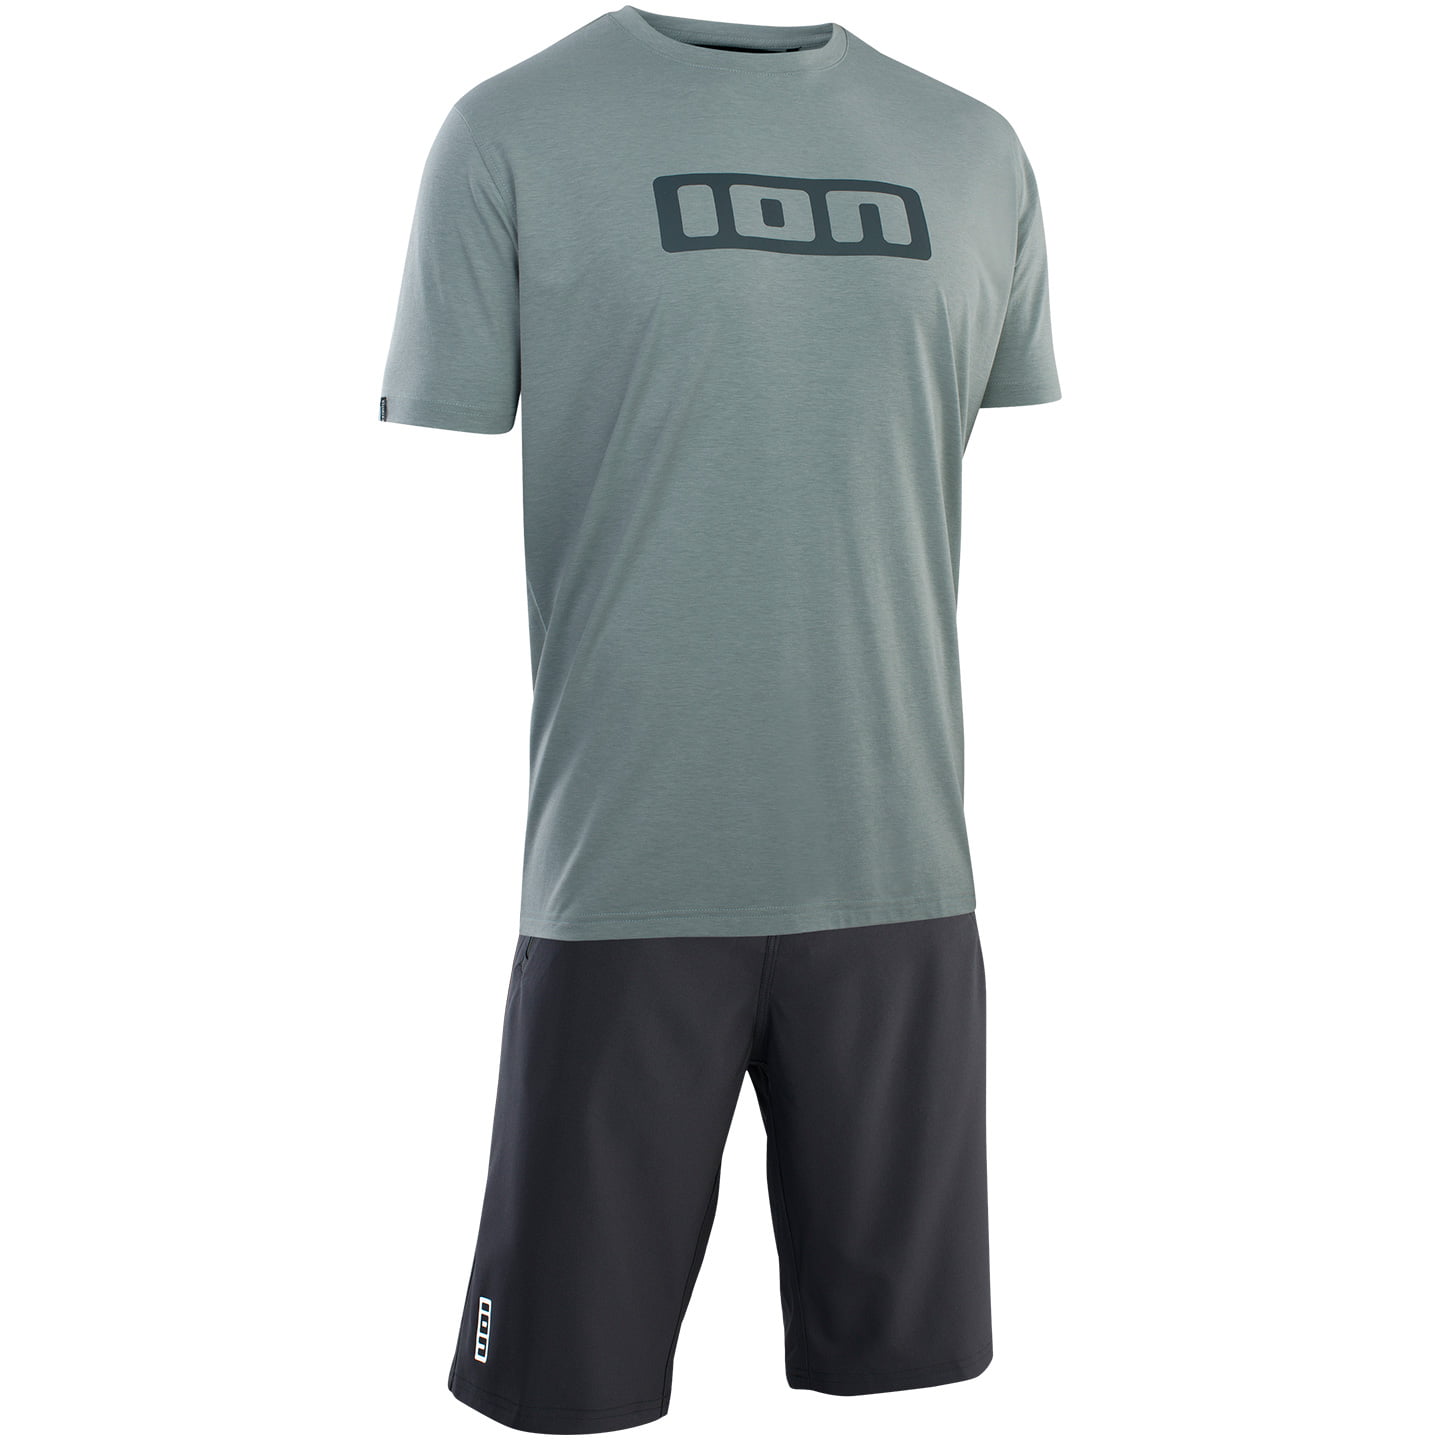 ION Logo DR Set (cycling jersey + cycling shorts) Set (2 pieces), for men